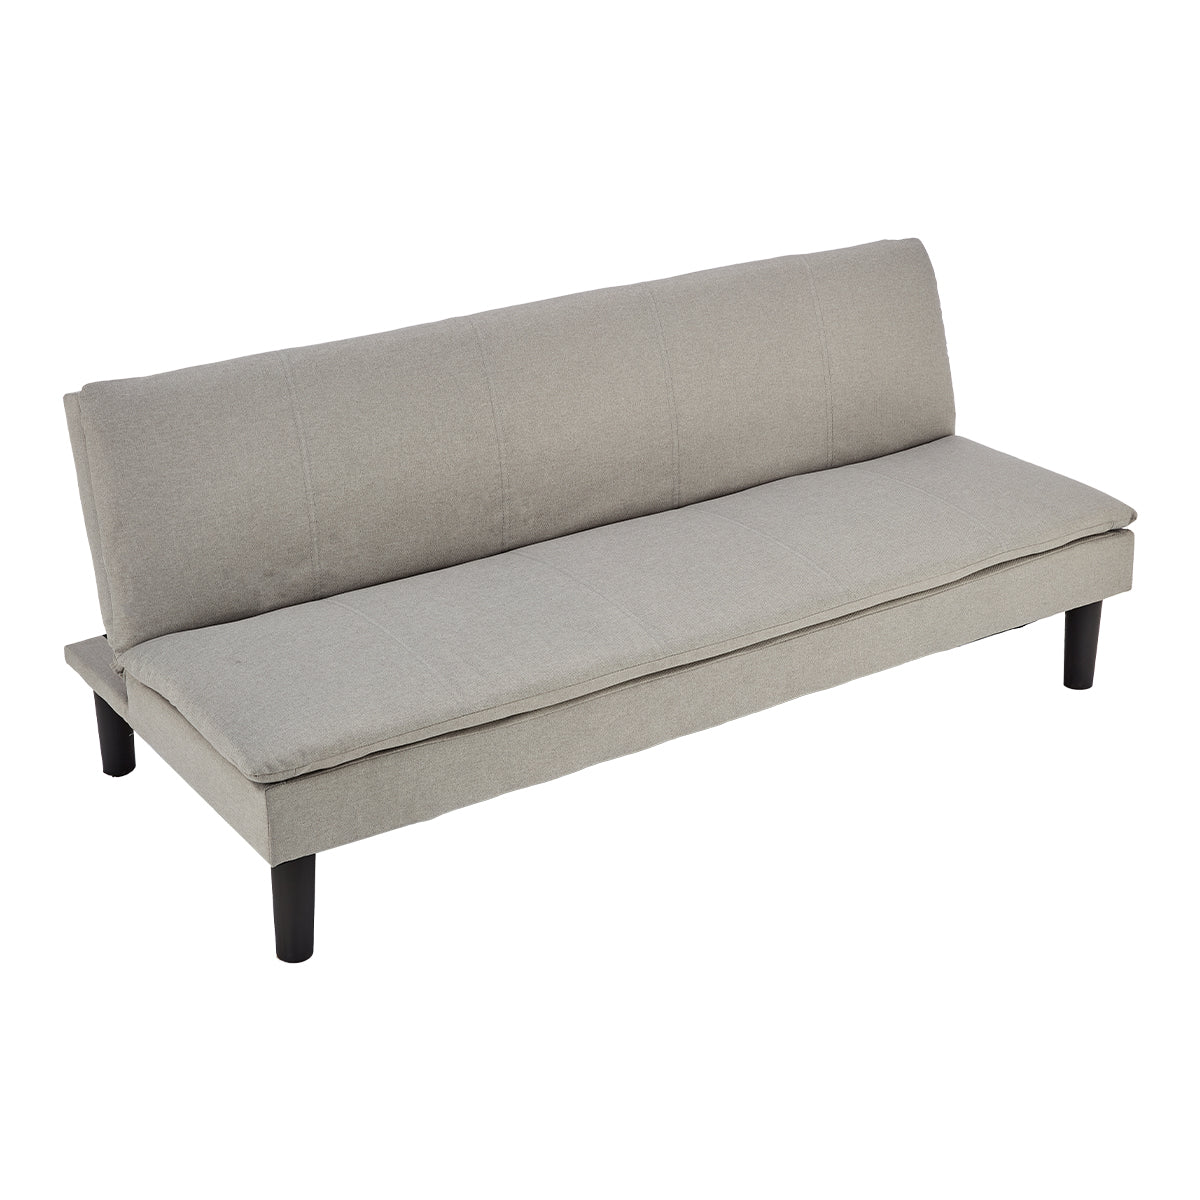 Monroe 3-Seater Faux Linen Fabric Modular Sofa Bed Couch - Light Grey